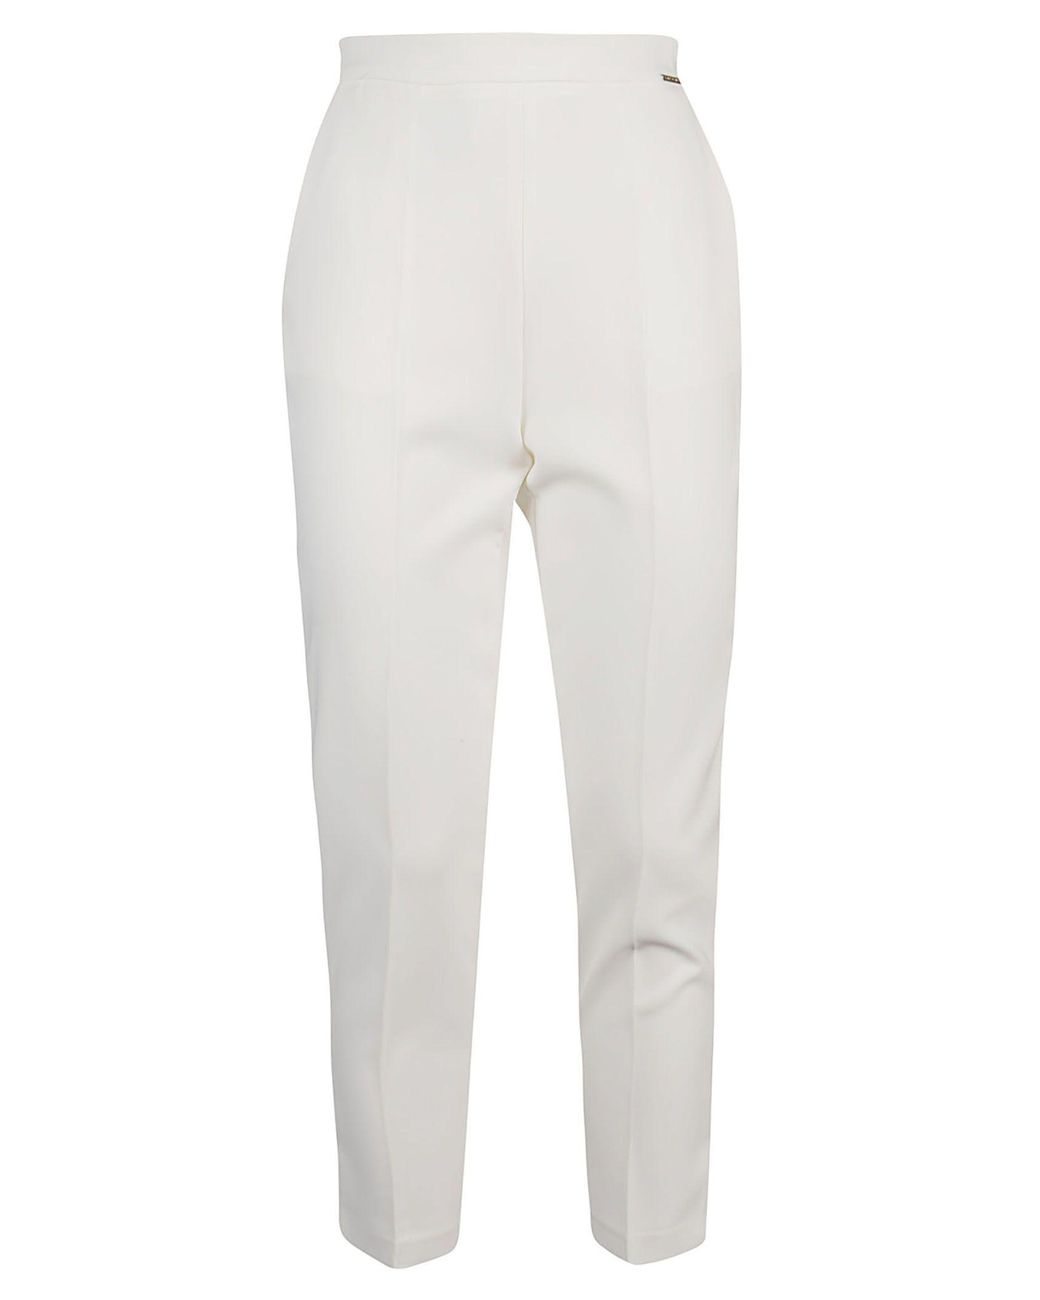 Elisabetta Franchi Synthetic Polyester Pants in White - Lyst